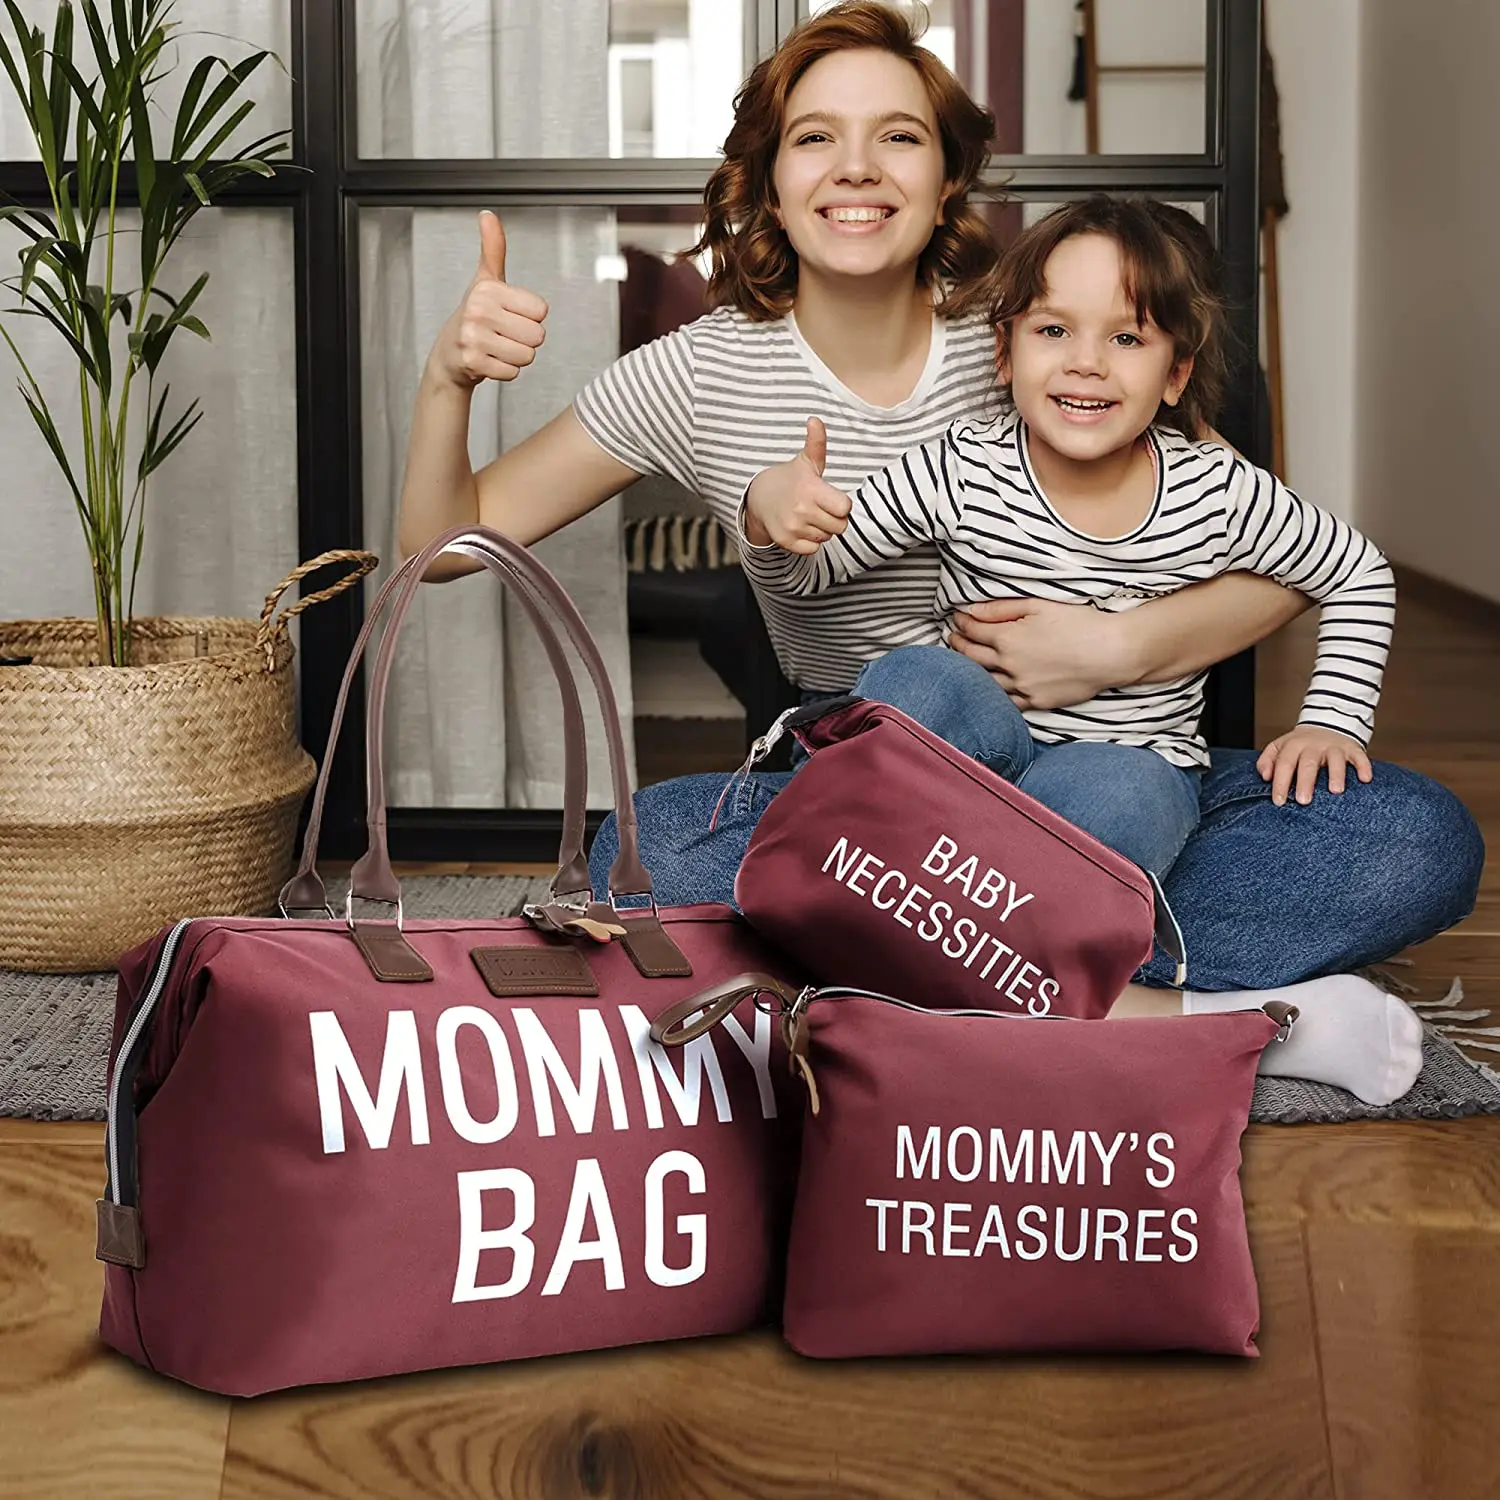 Mommy Bag for Hospital, Diaper Bag with Mommy's Treasures Bag and Shoulder  Straps, Large Travel Diaper Tote for Mom and Dad, Multifunction Baby Bag